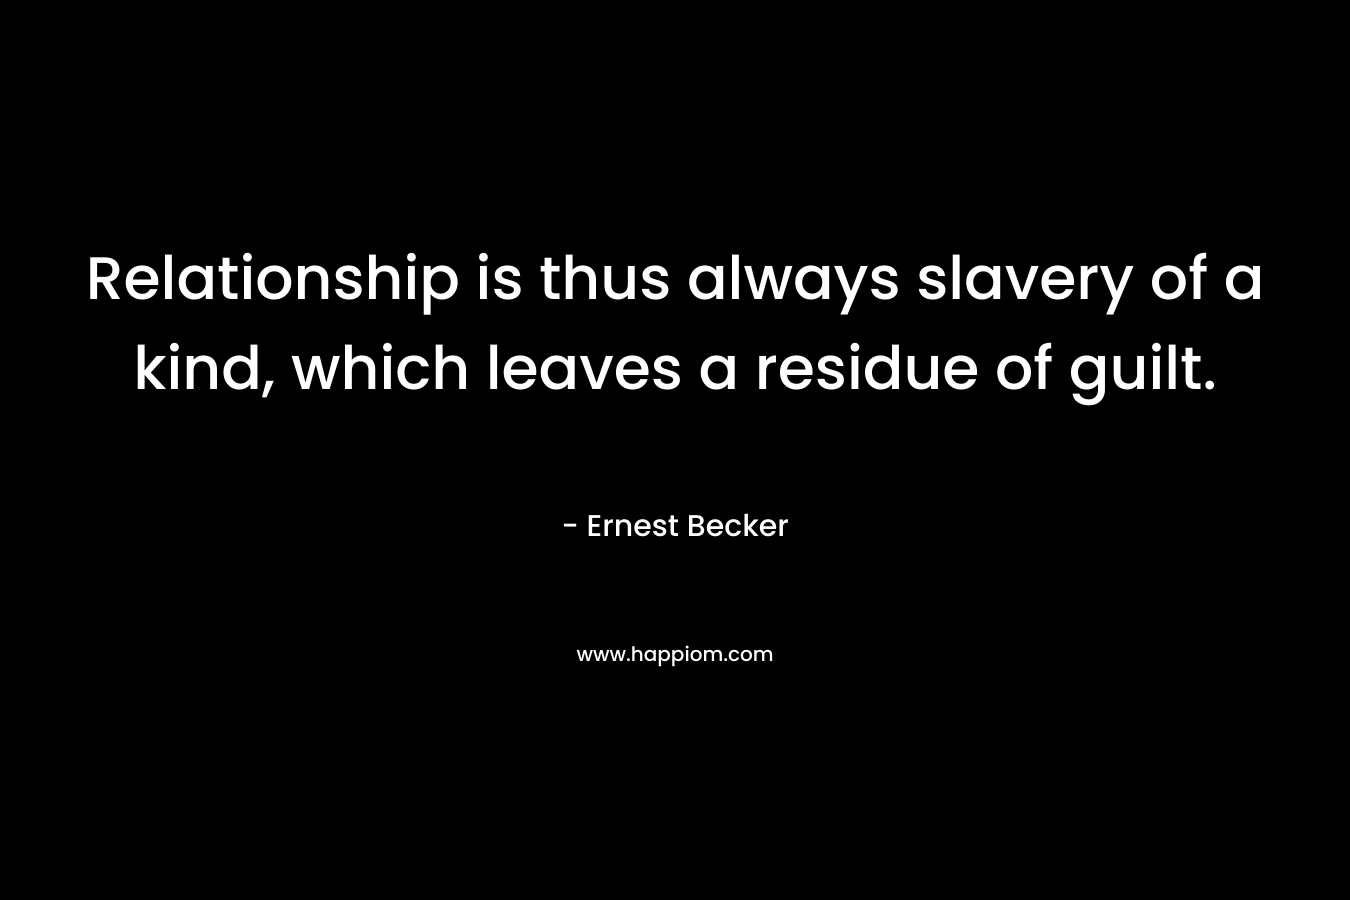 Relationship is thus always slavery of a kind, which leaves a residue of guilt. – Ernest Becker